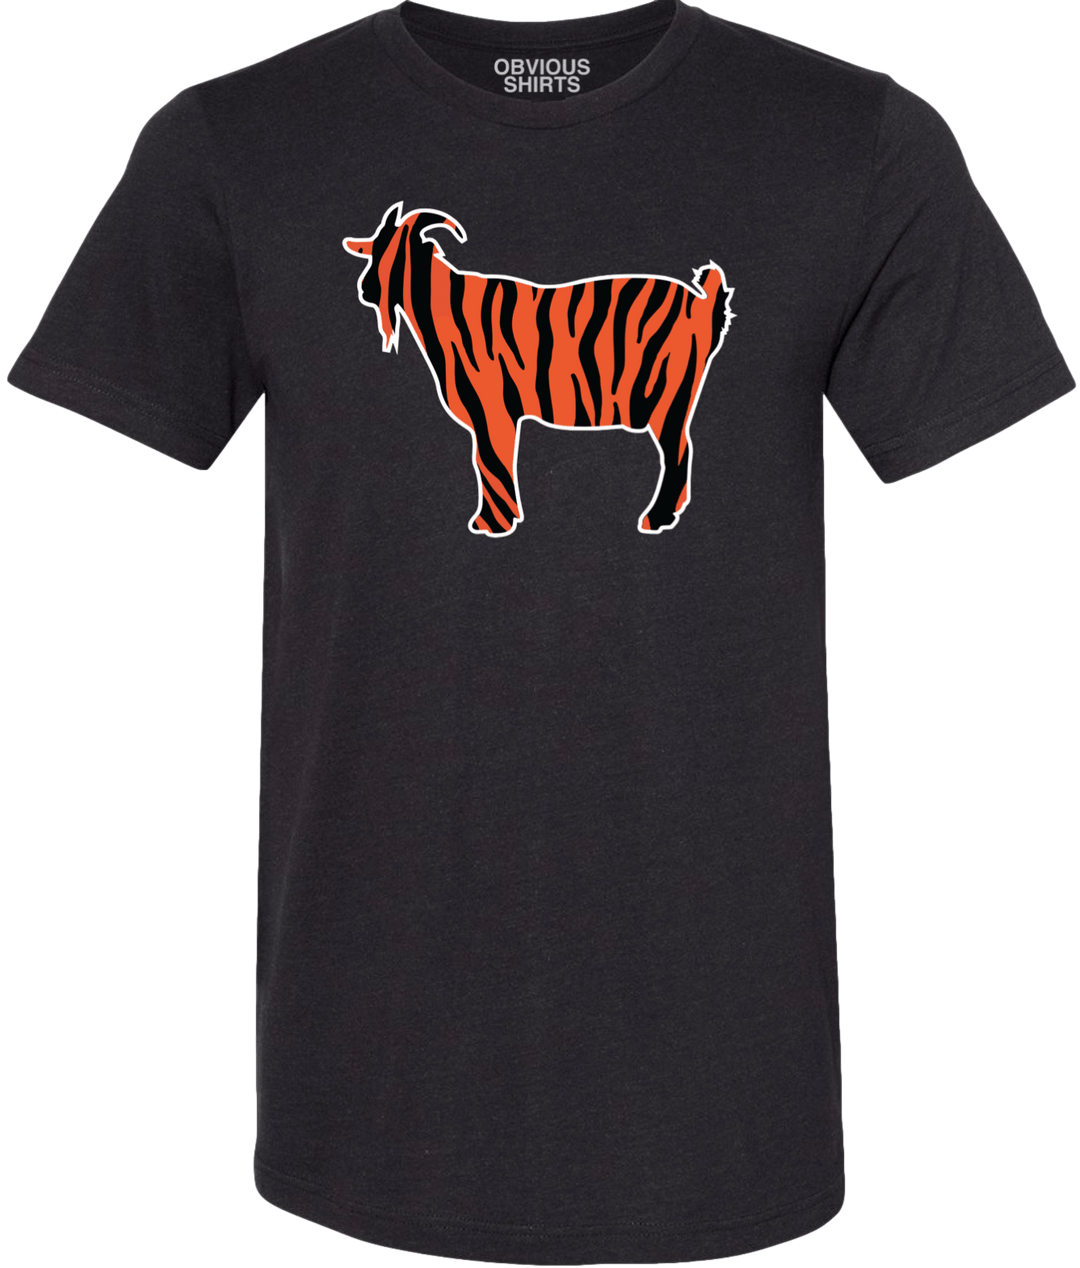 THE TIGER GOAT. - OBVIOUS SHIRTS